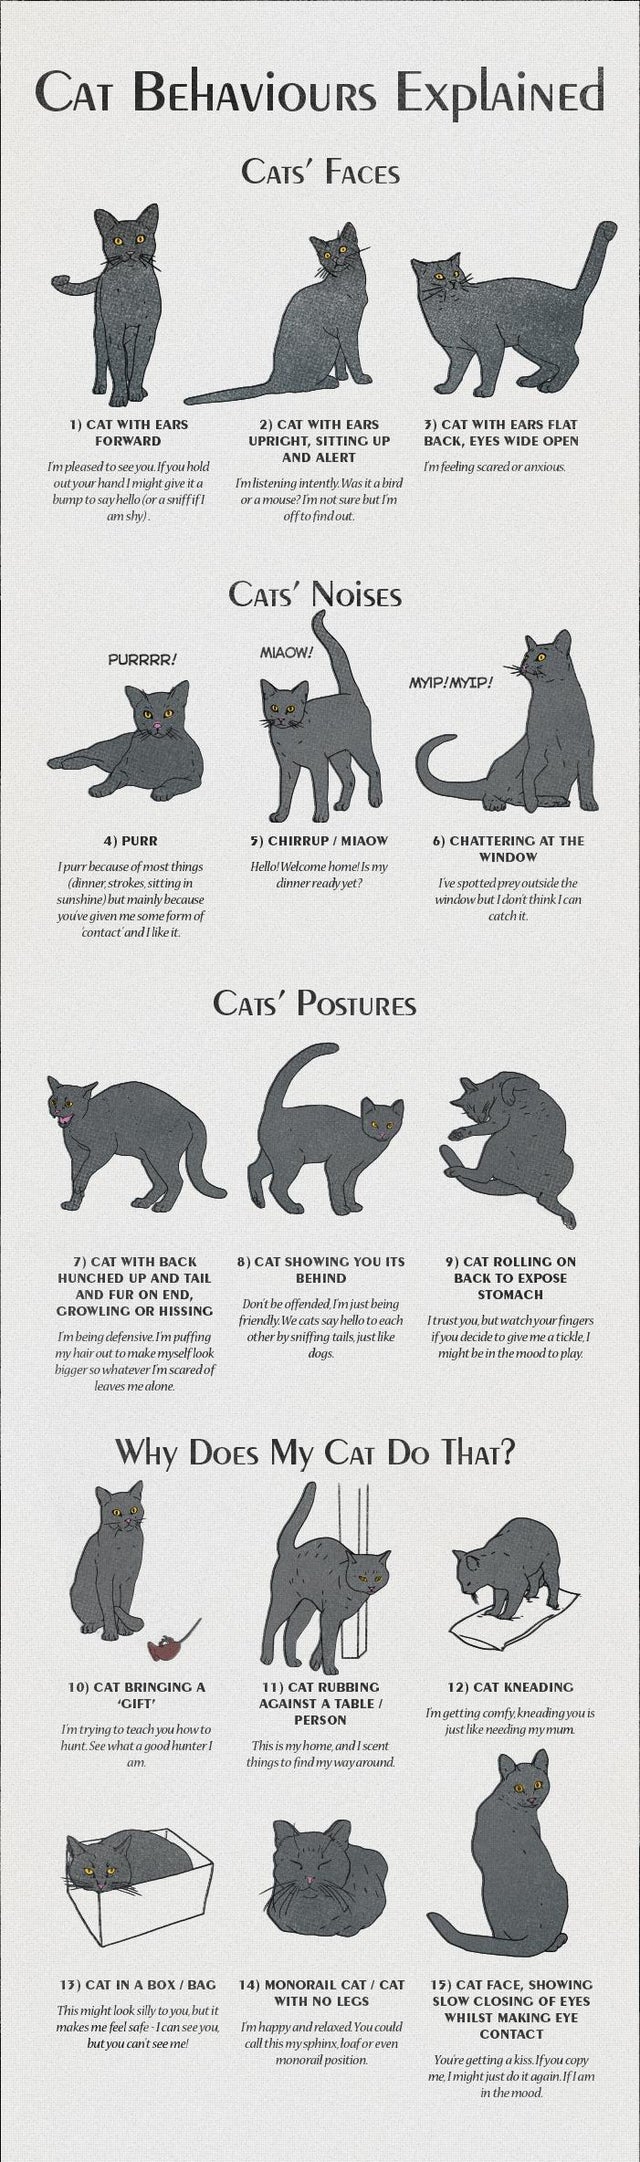 cat behaviors explained - Cat Behaviours Explained Cats' Faces 1 Cat With Ears Forward 2 Cat With Ears Upricht, Sitting Up And Alert I'm listening intently. Was it a bird or a mouse? I'm not sure but I'm offto fmdout 3 Cat With Ears Flat Back, Eyes Wide O